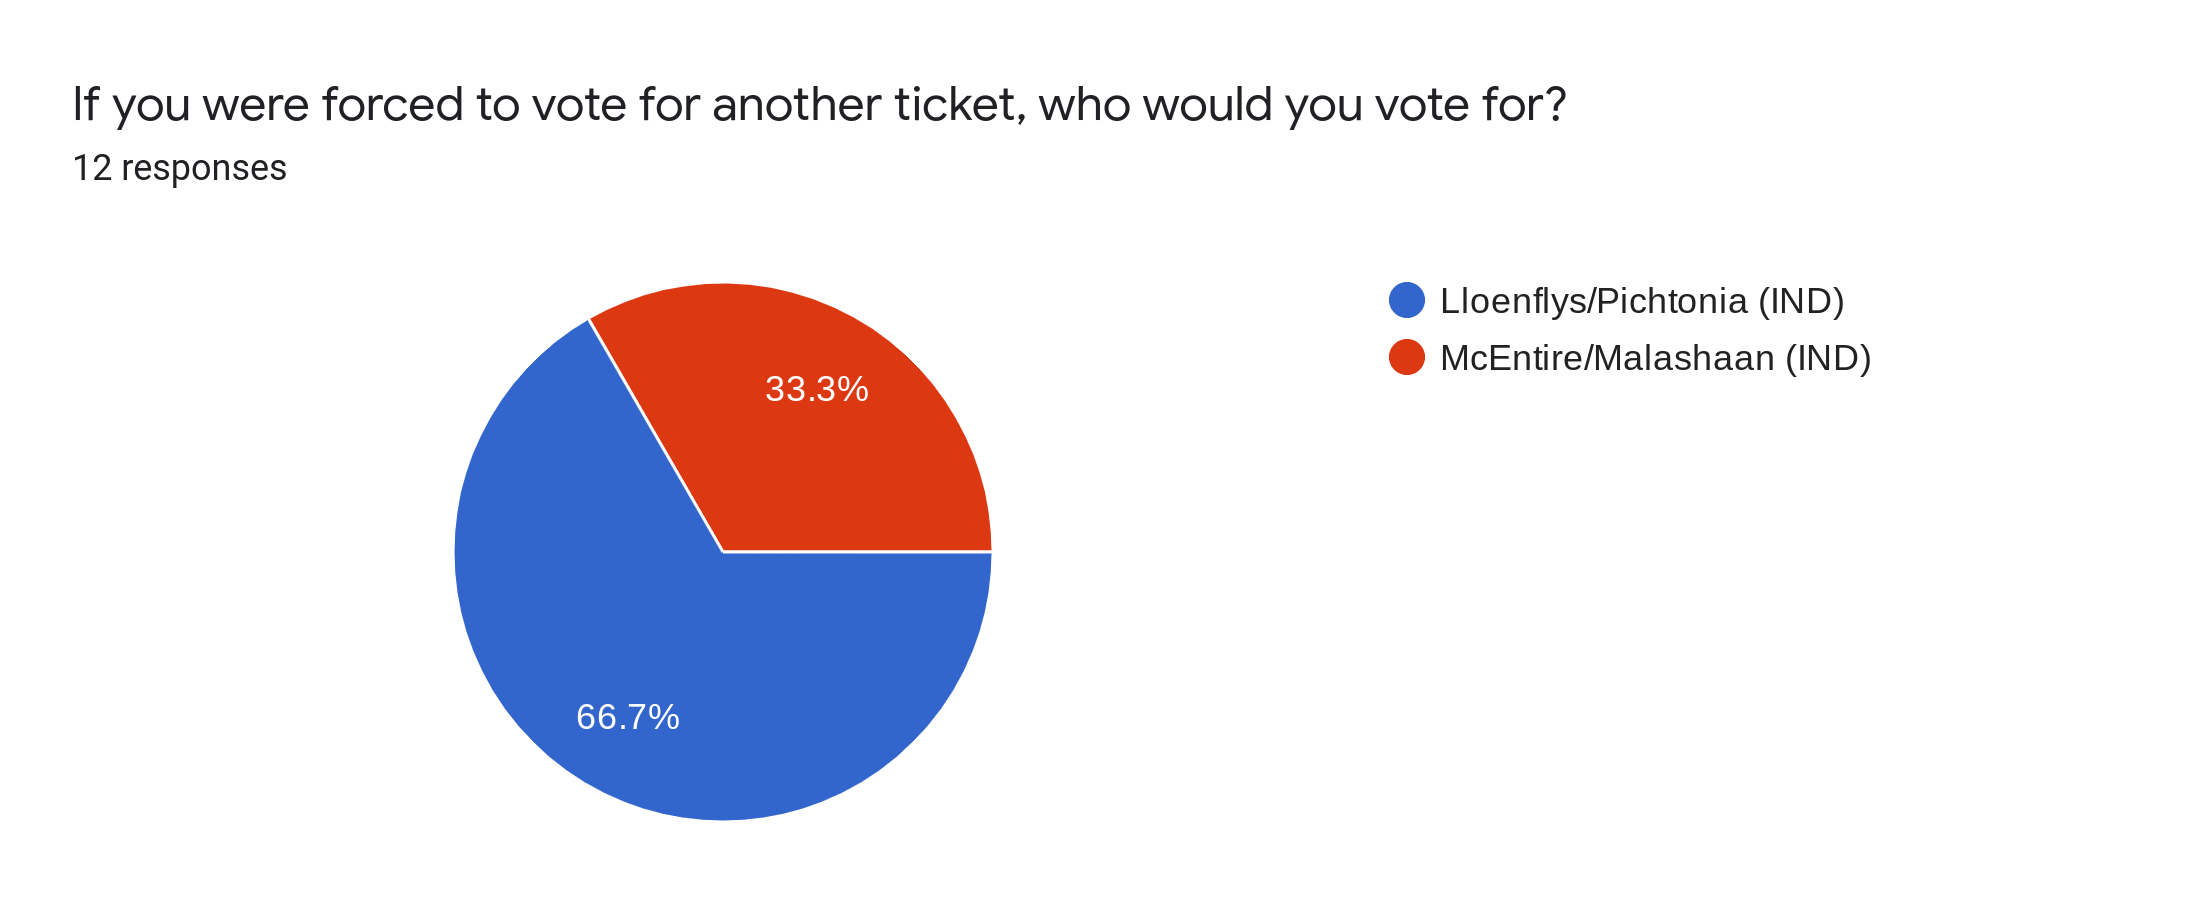 Forms response chart. Question title: If you were forced to vote for another ticket, who would you vote for?. Number of responses: 12 responses.